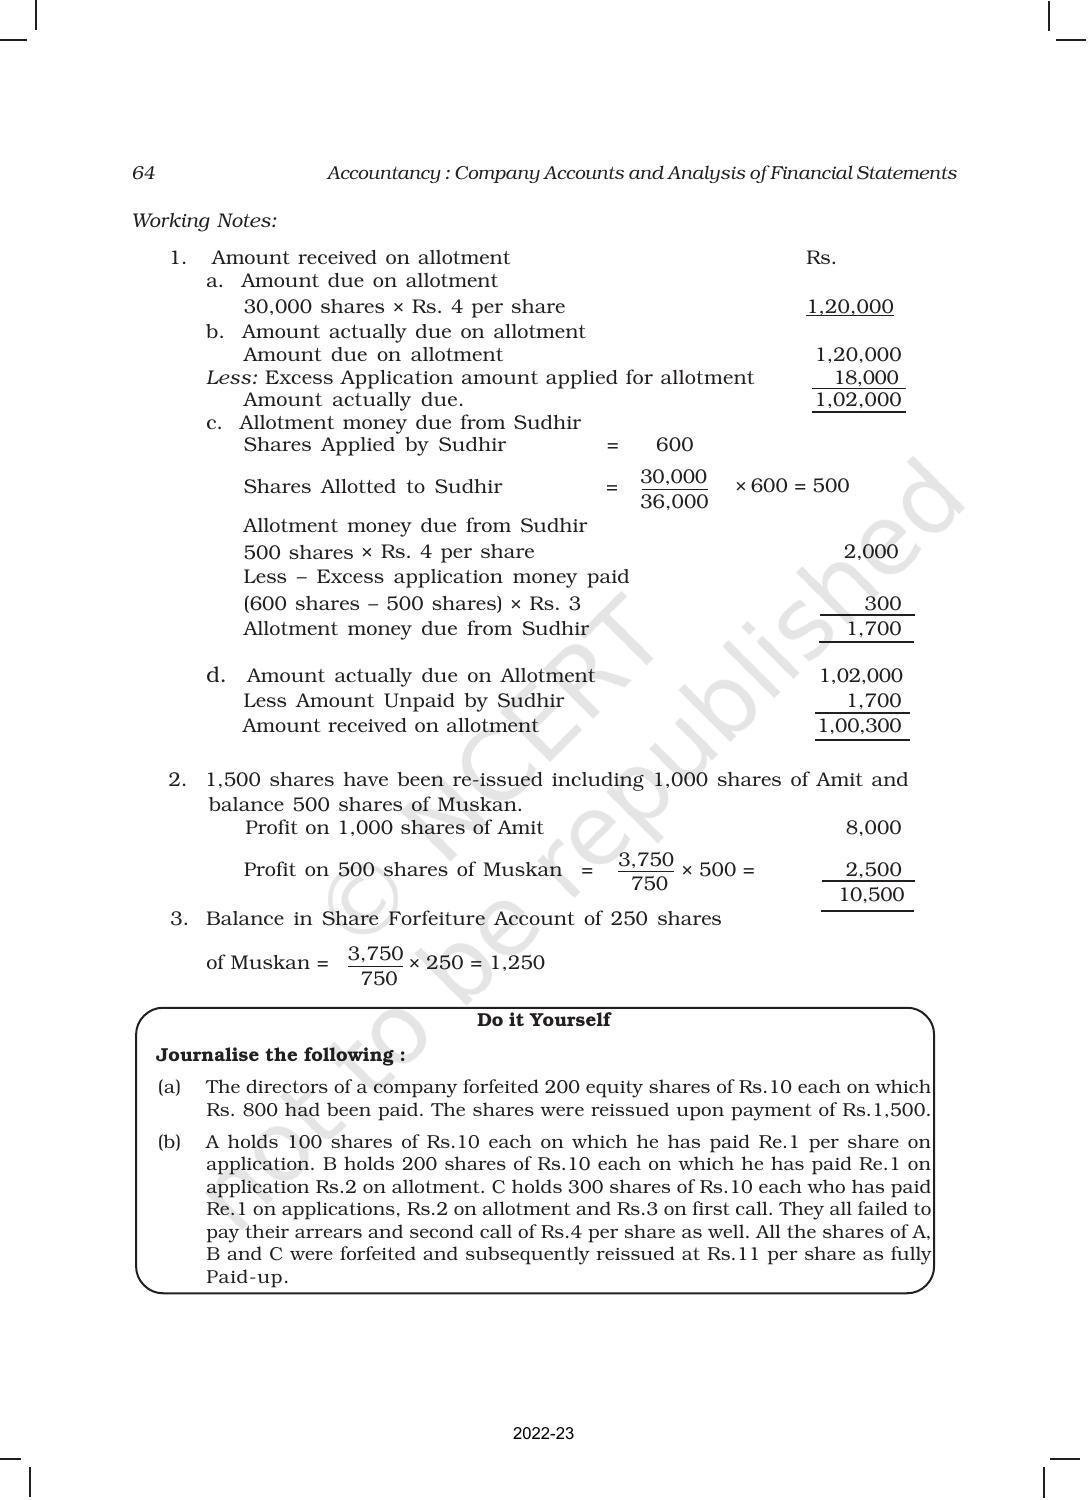 NCERT Book for Class 12 Accountancy Part II Chapter 1 Accounting for Share Capital - Page 64